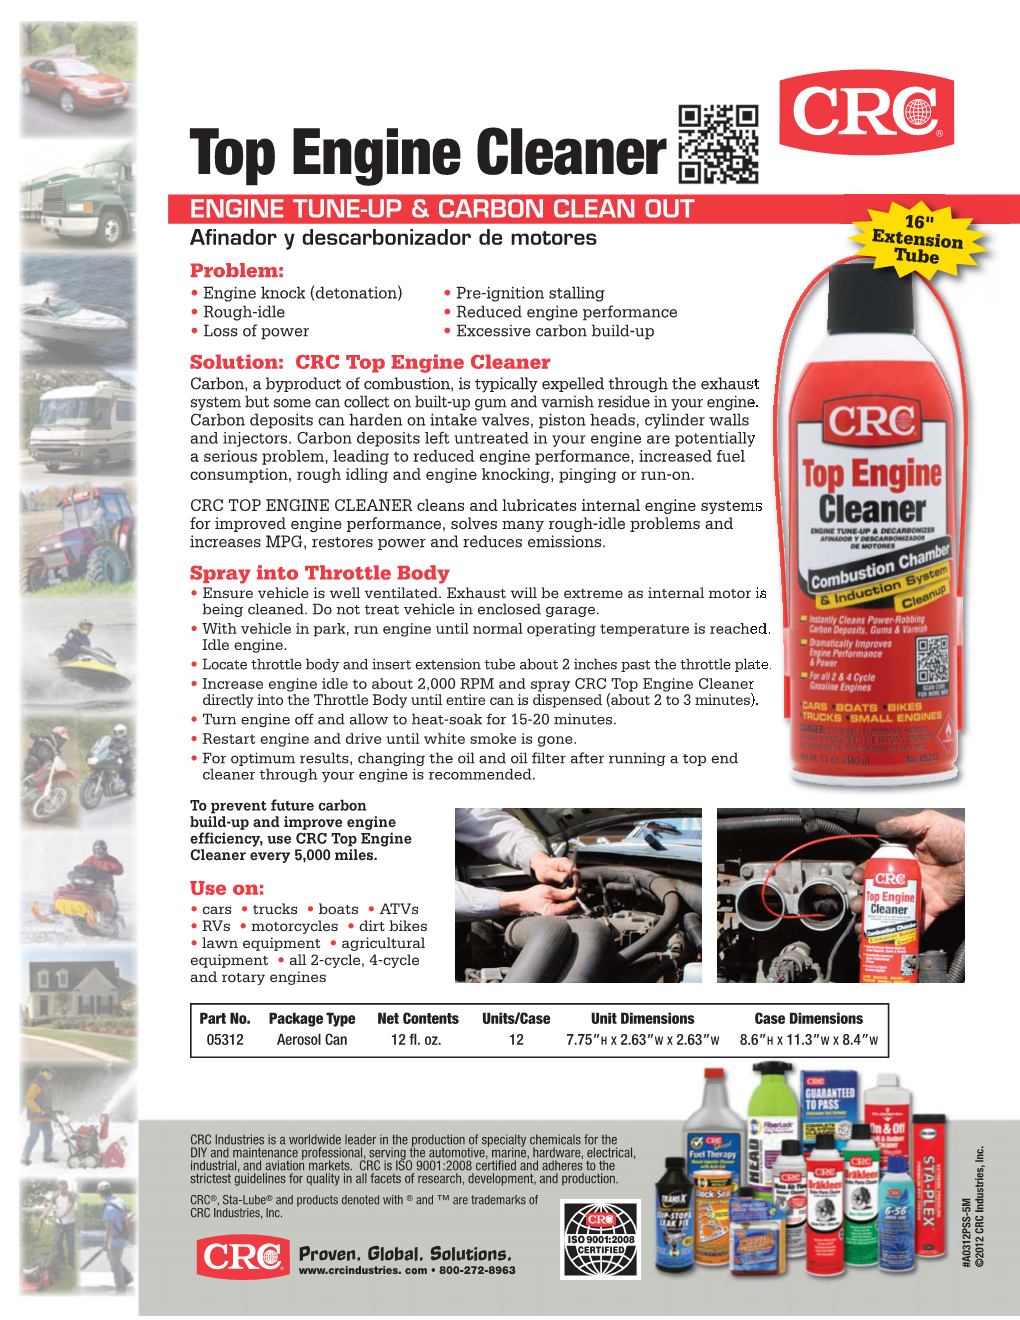 Top Engine Cleaner